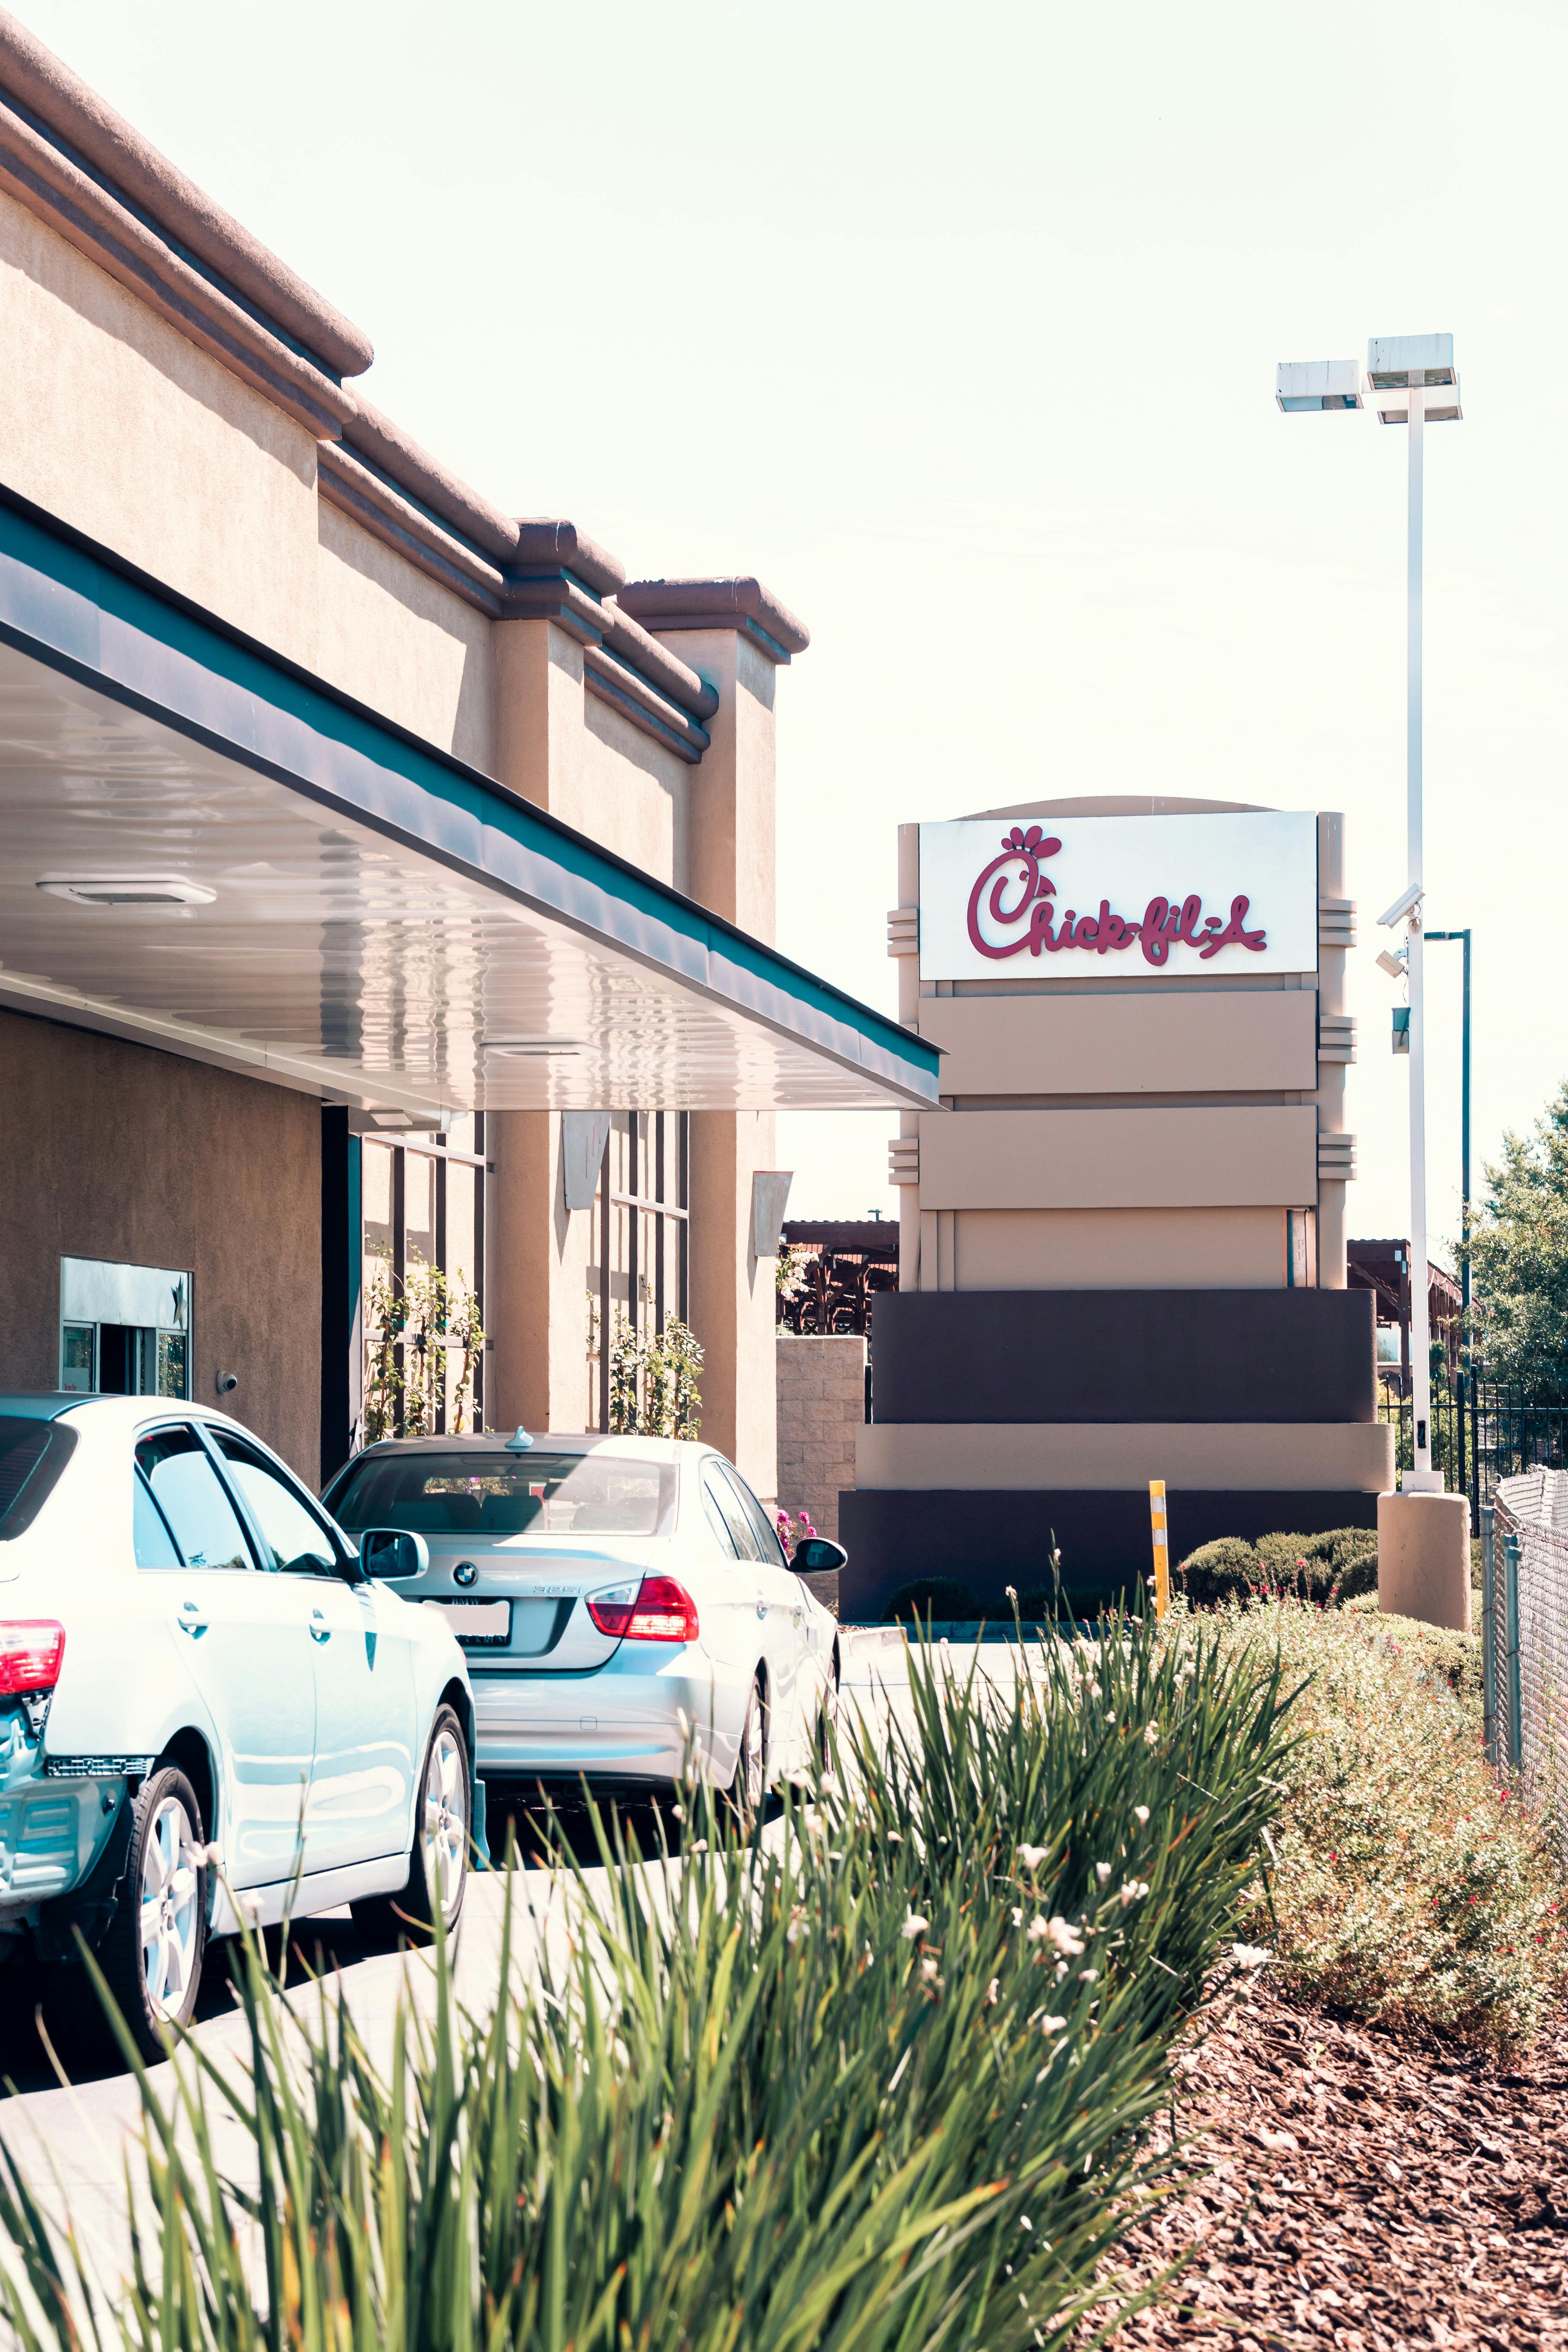 The Title ChickFilA Has Retained For The Eighth Straight Year